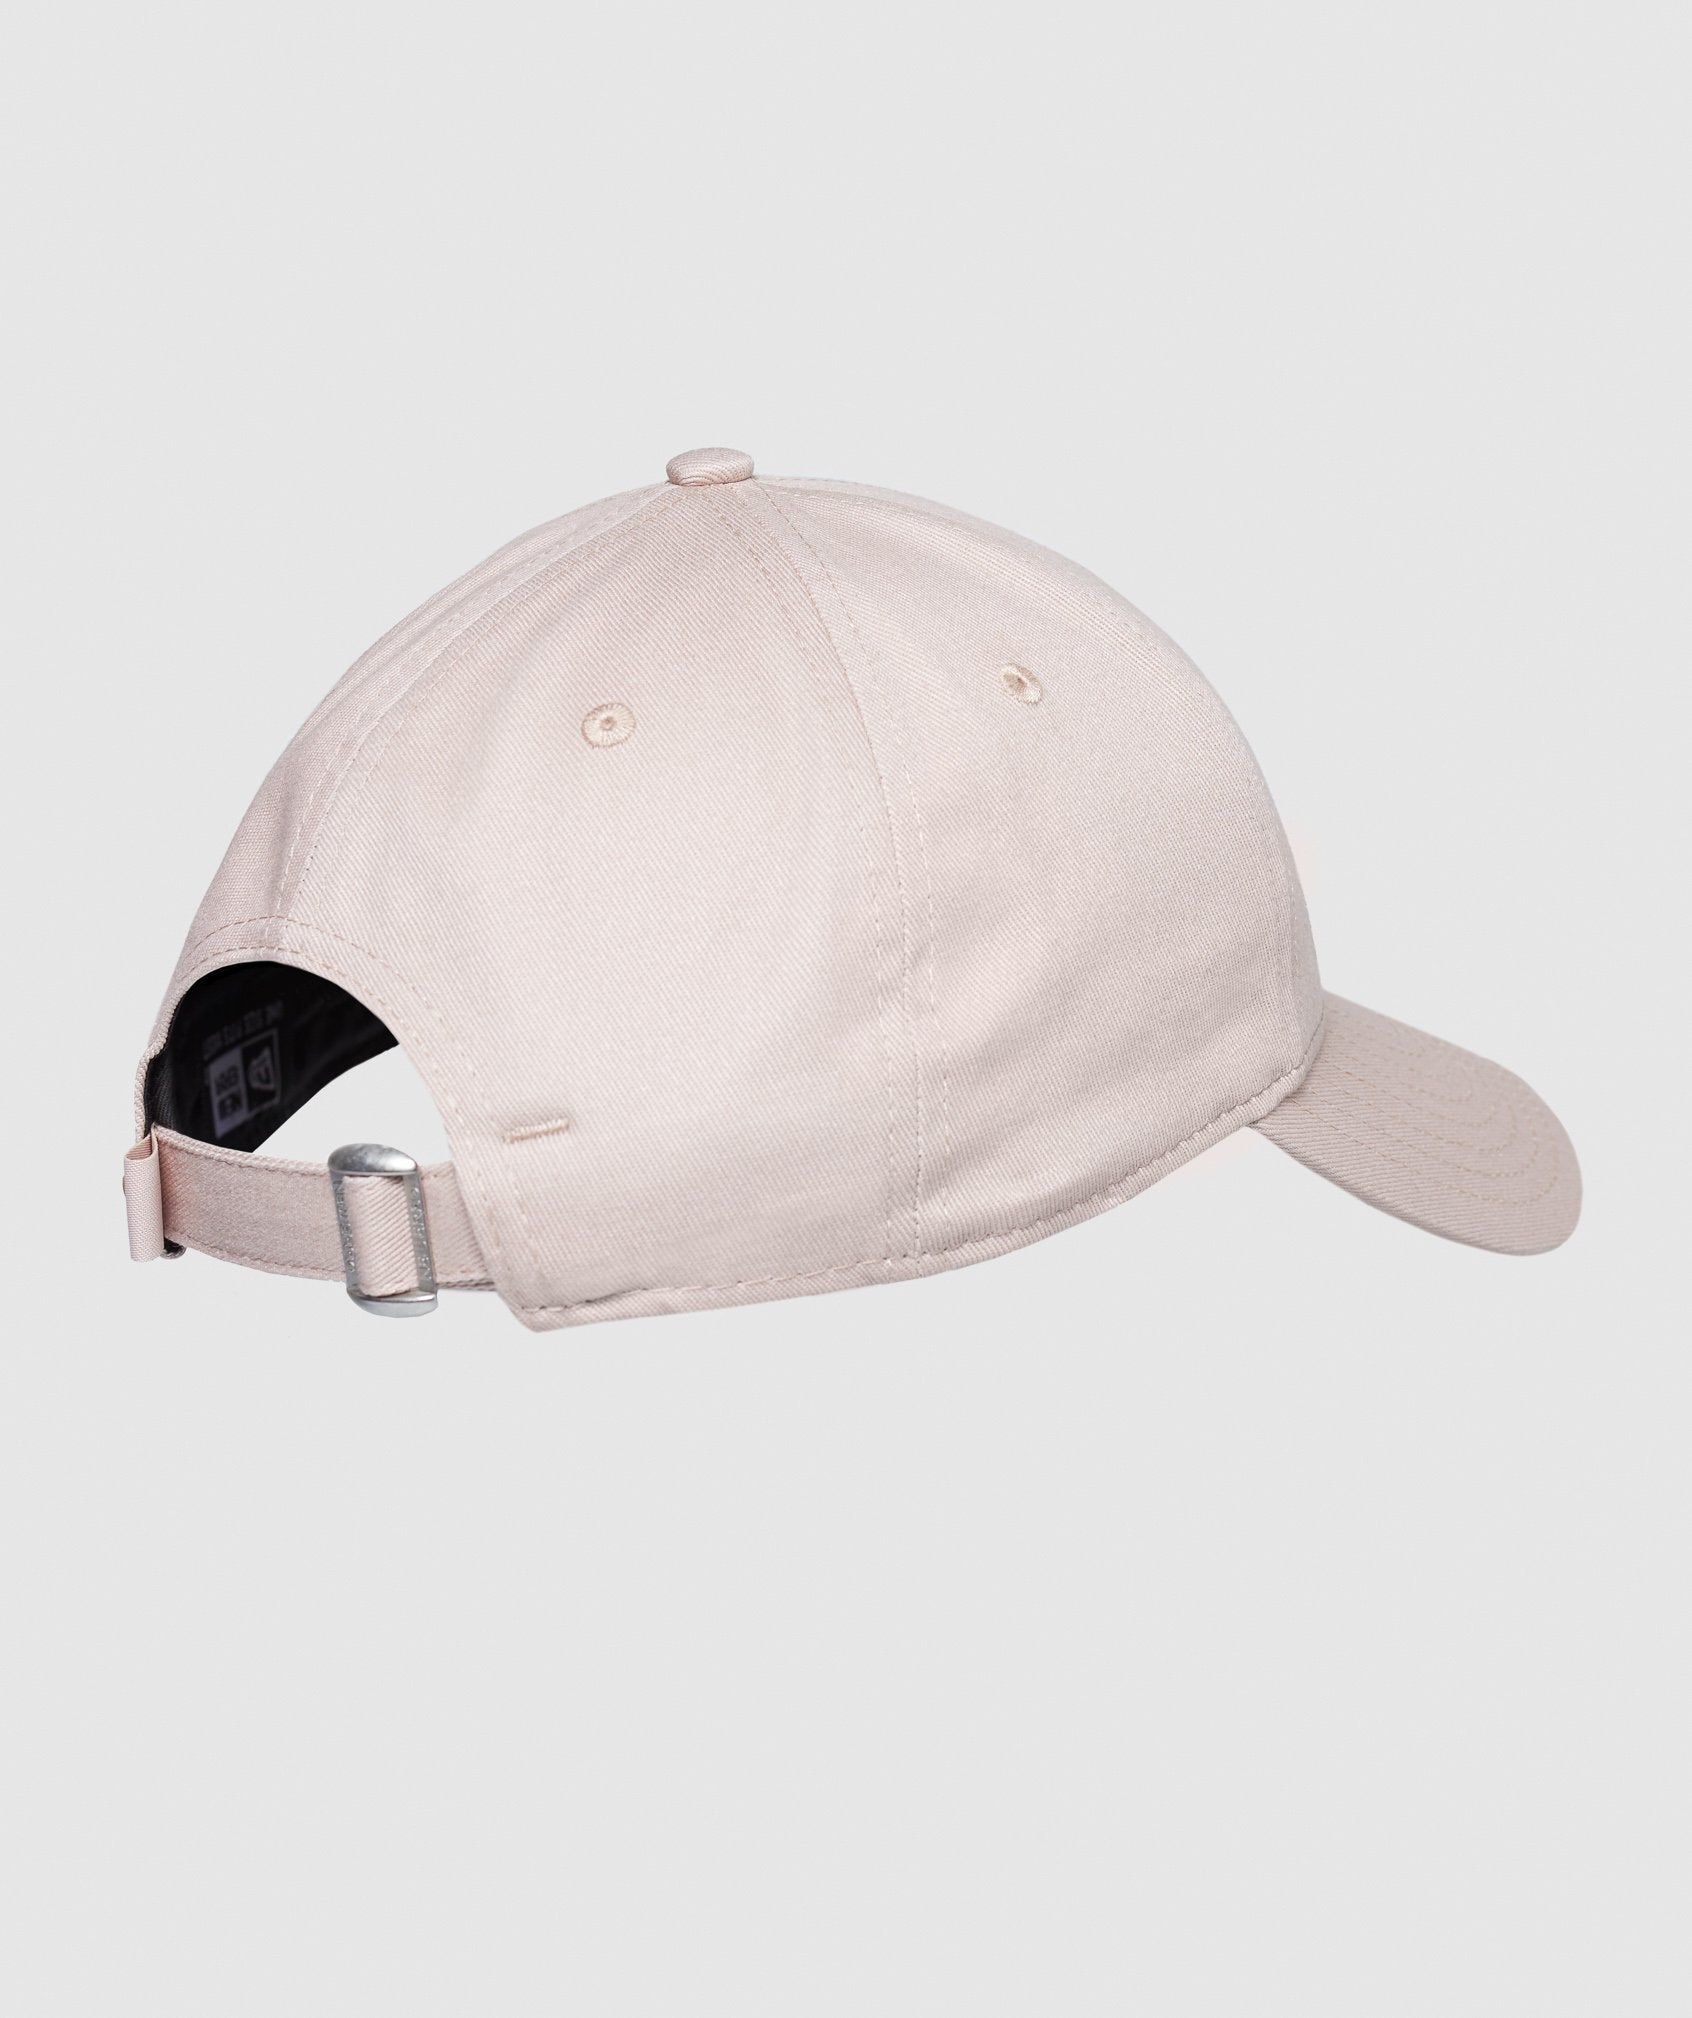 New Era 9FORTY Adjustable in Nude - view 2